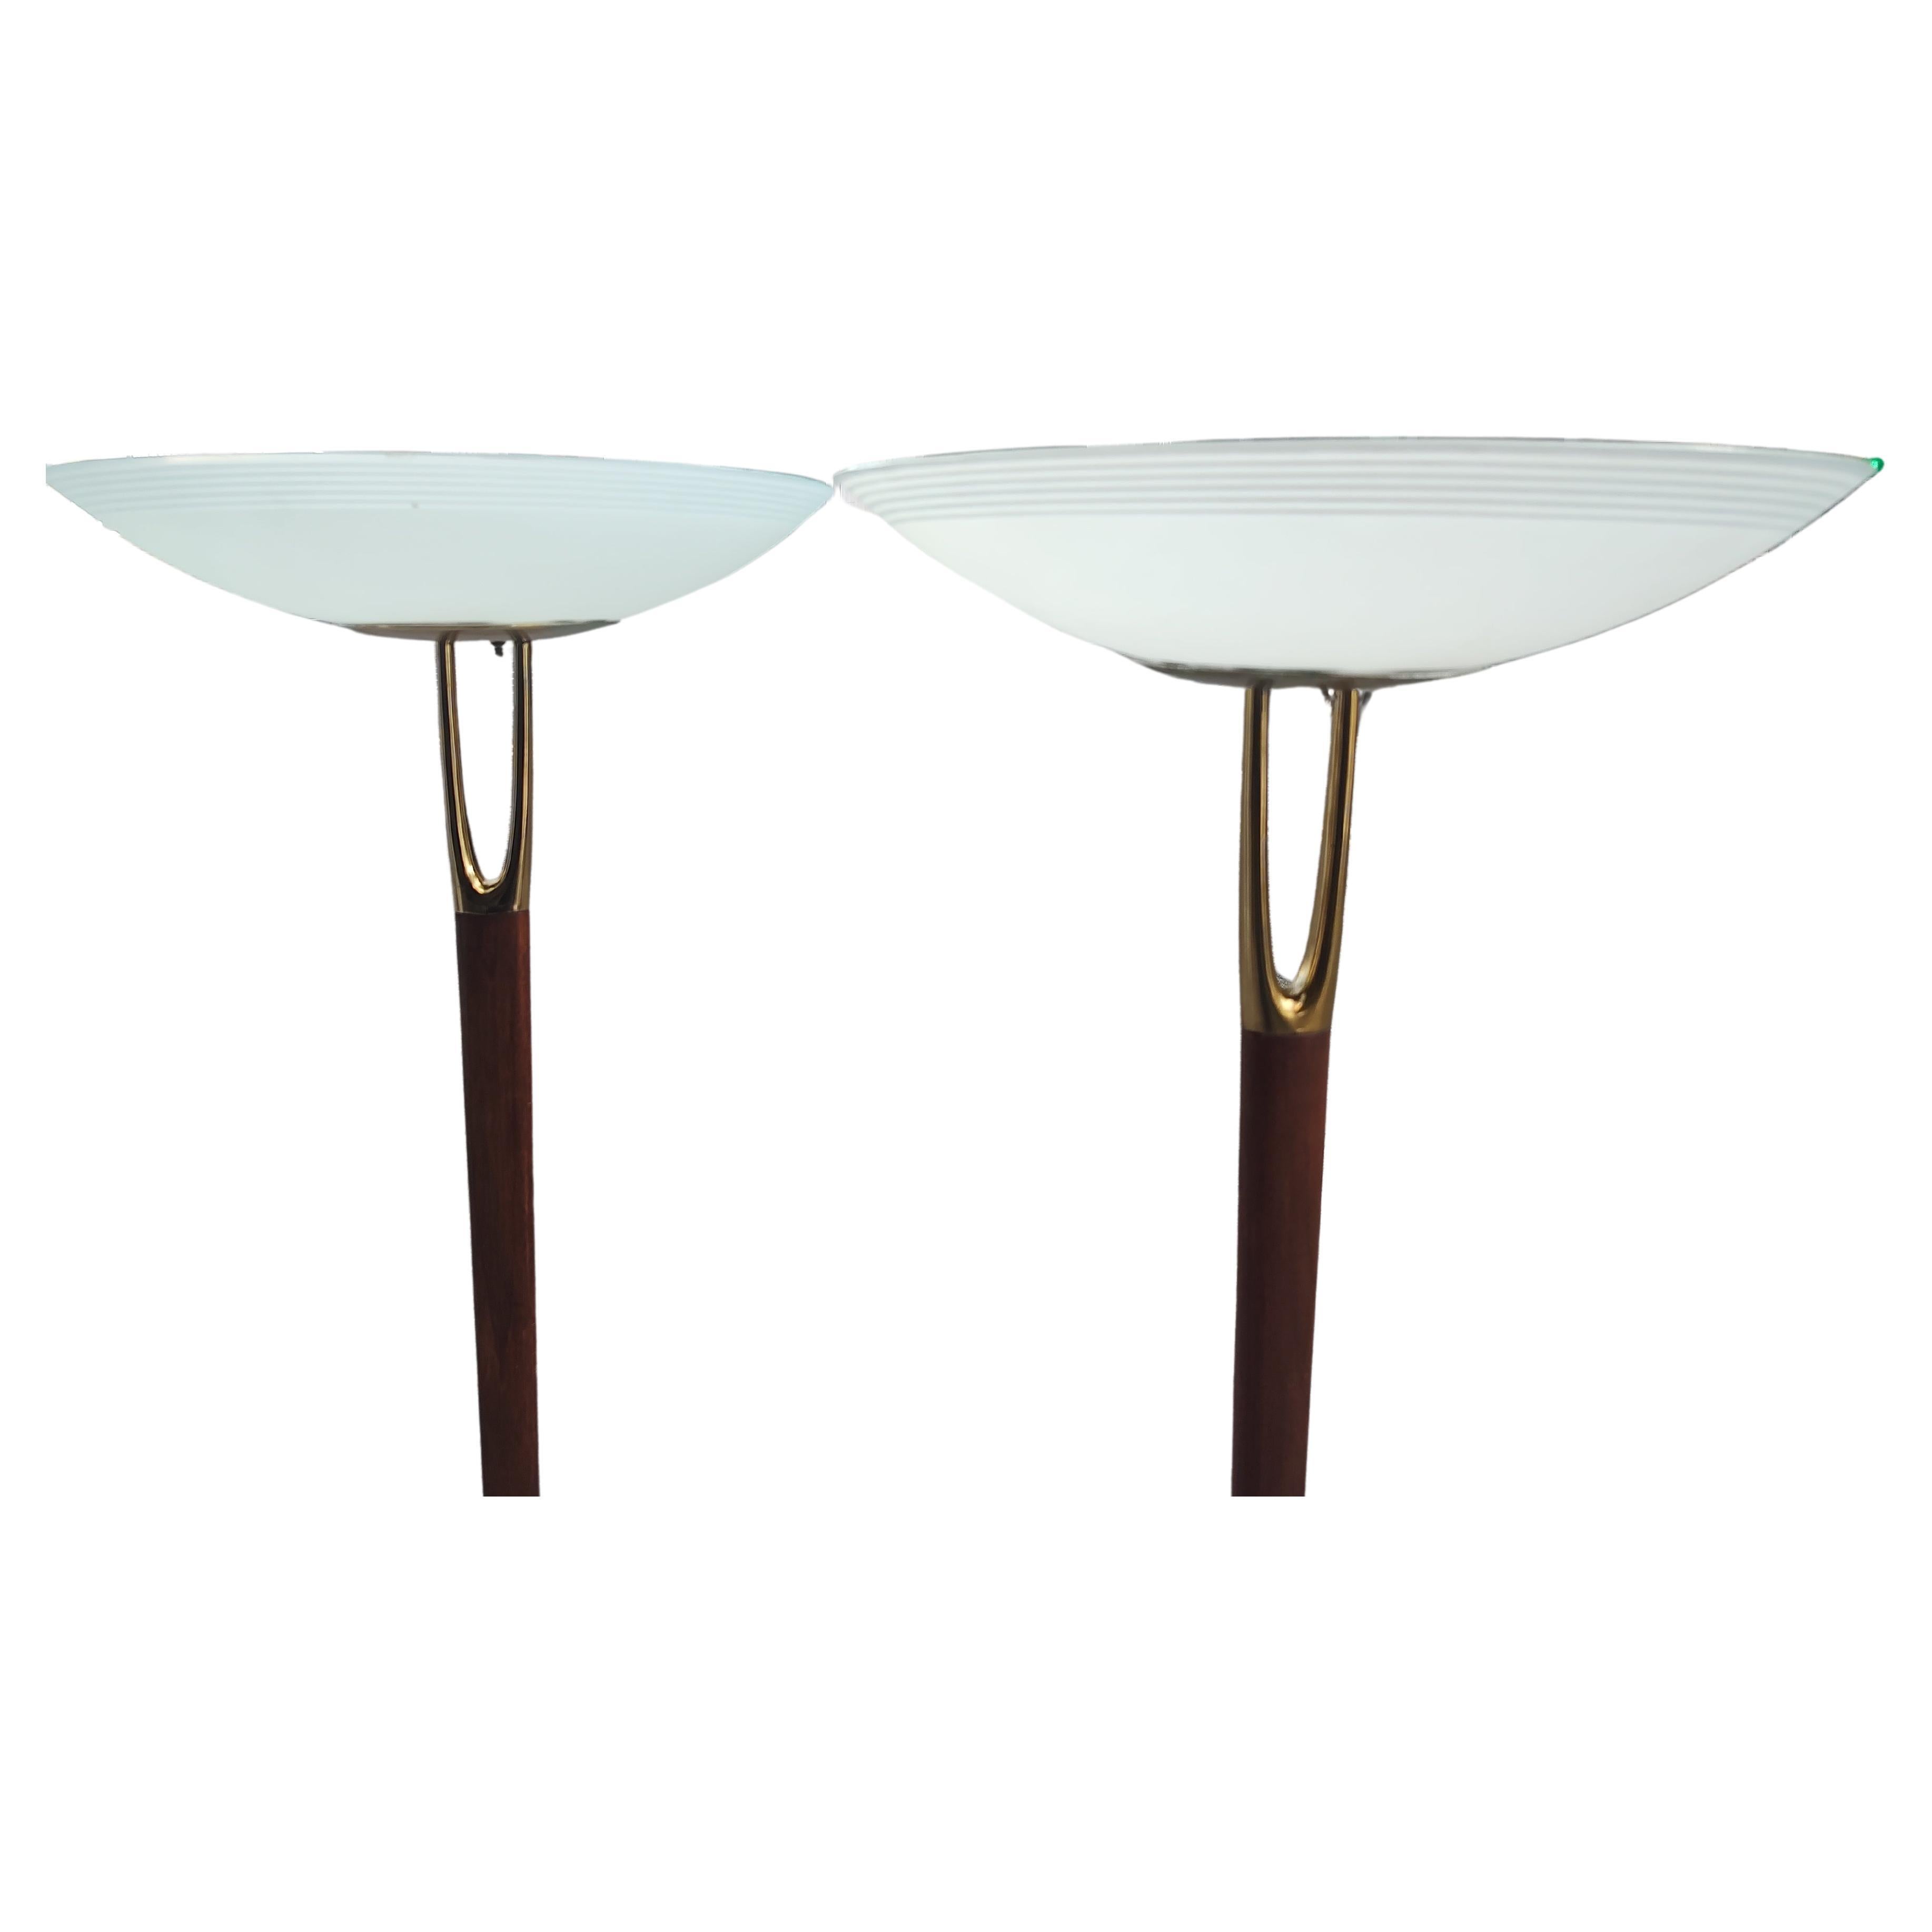 Pair of Mid Century Modern Wishbone Floor Lamps by Gerald Thurston for Laurel For Sale 3